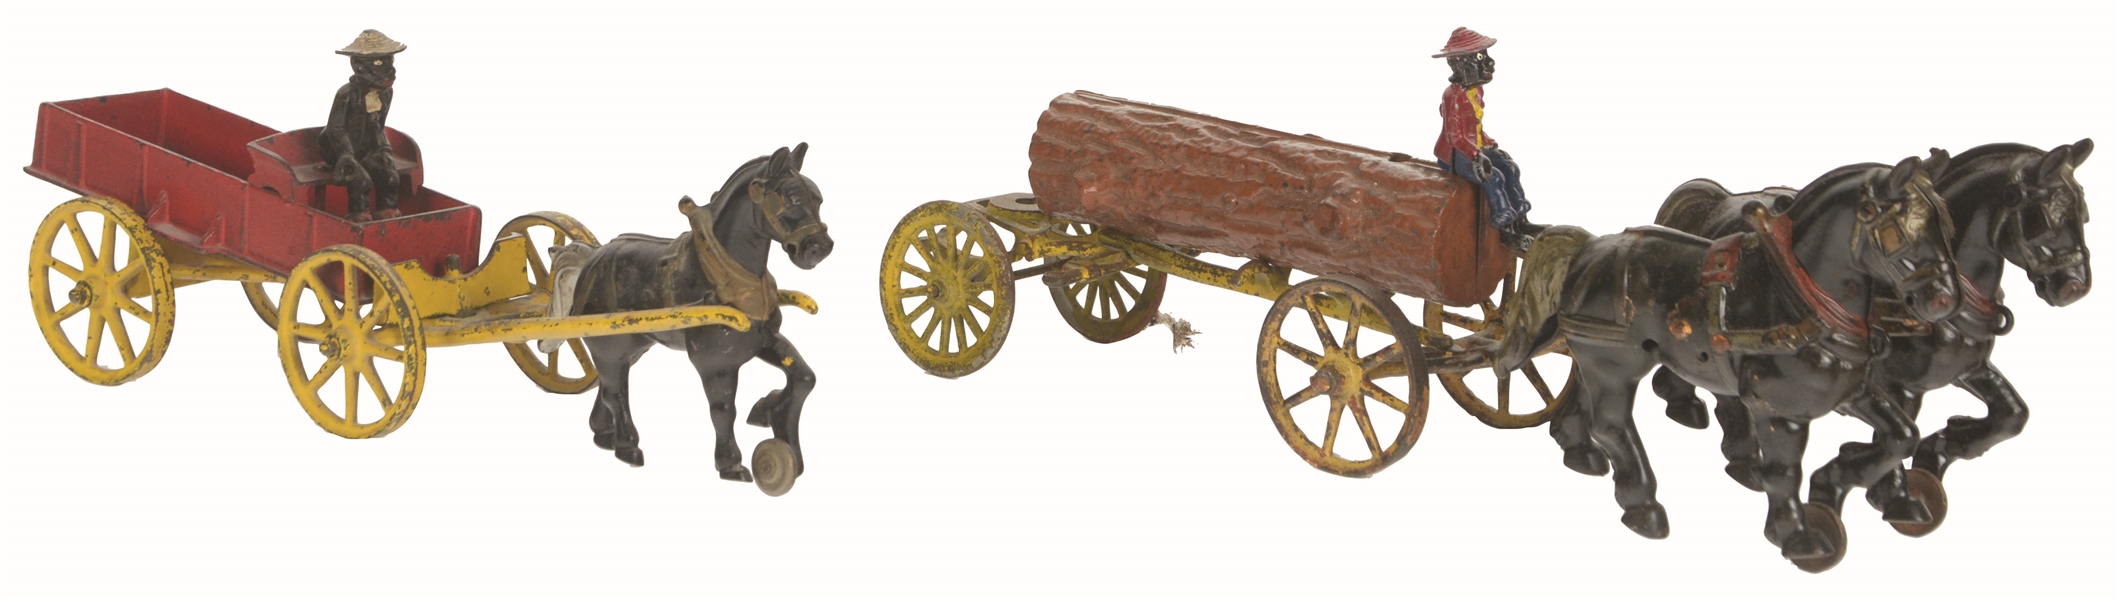 LOT OF 2: CAST-IRON AMERICAN MADE HORSE-DRAWN WAGON TOYS.